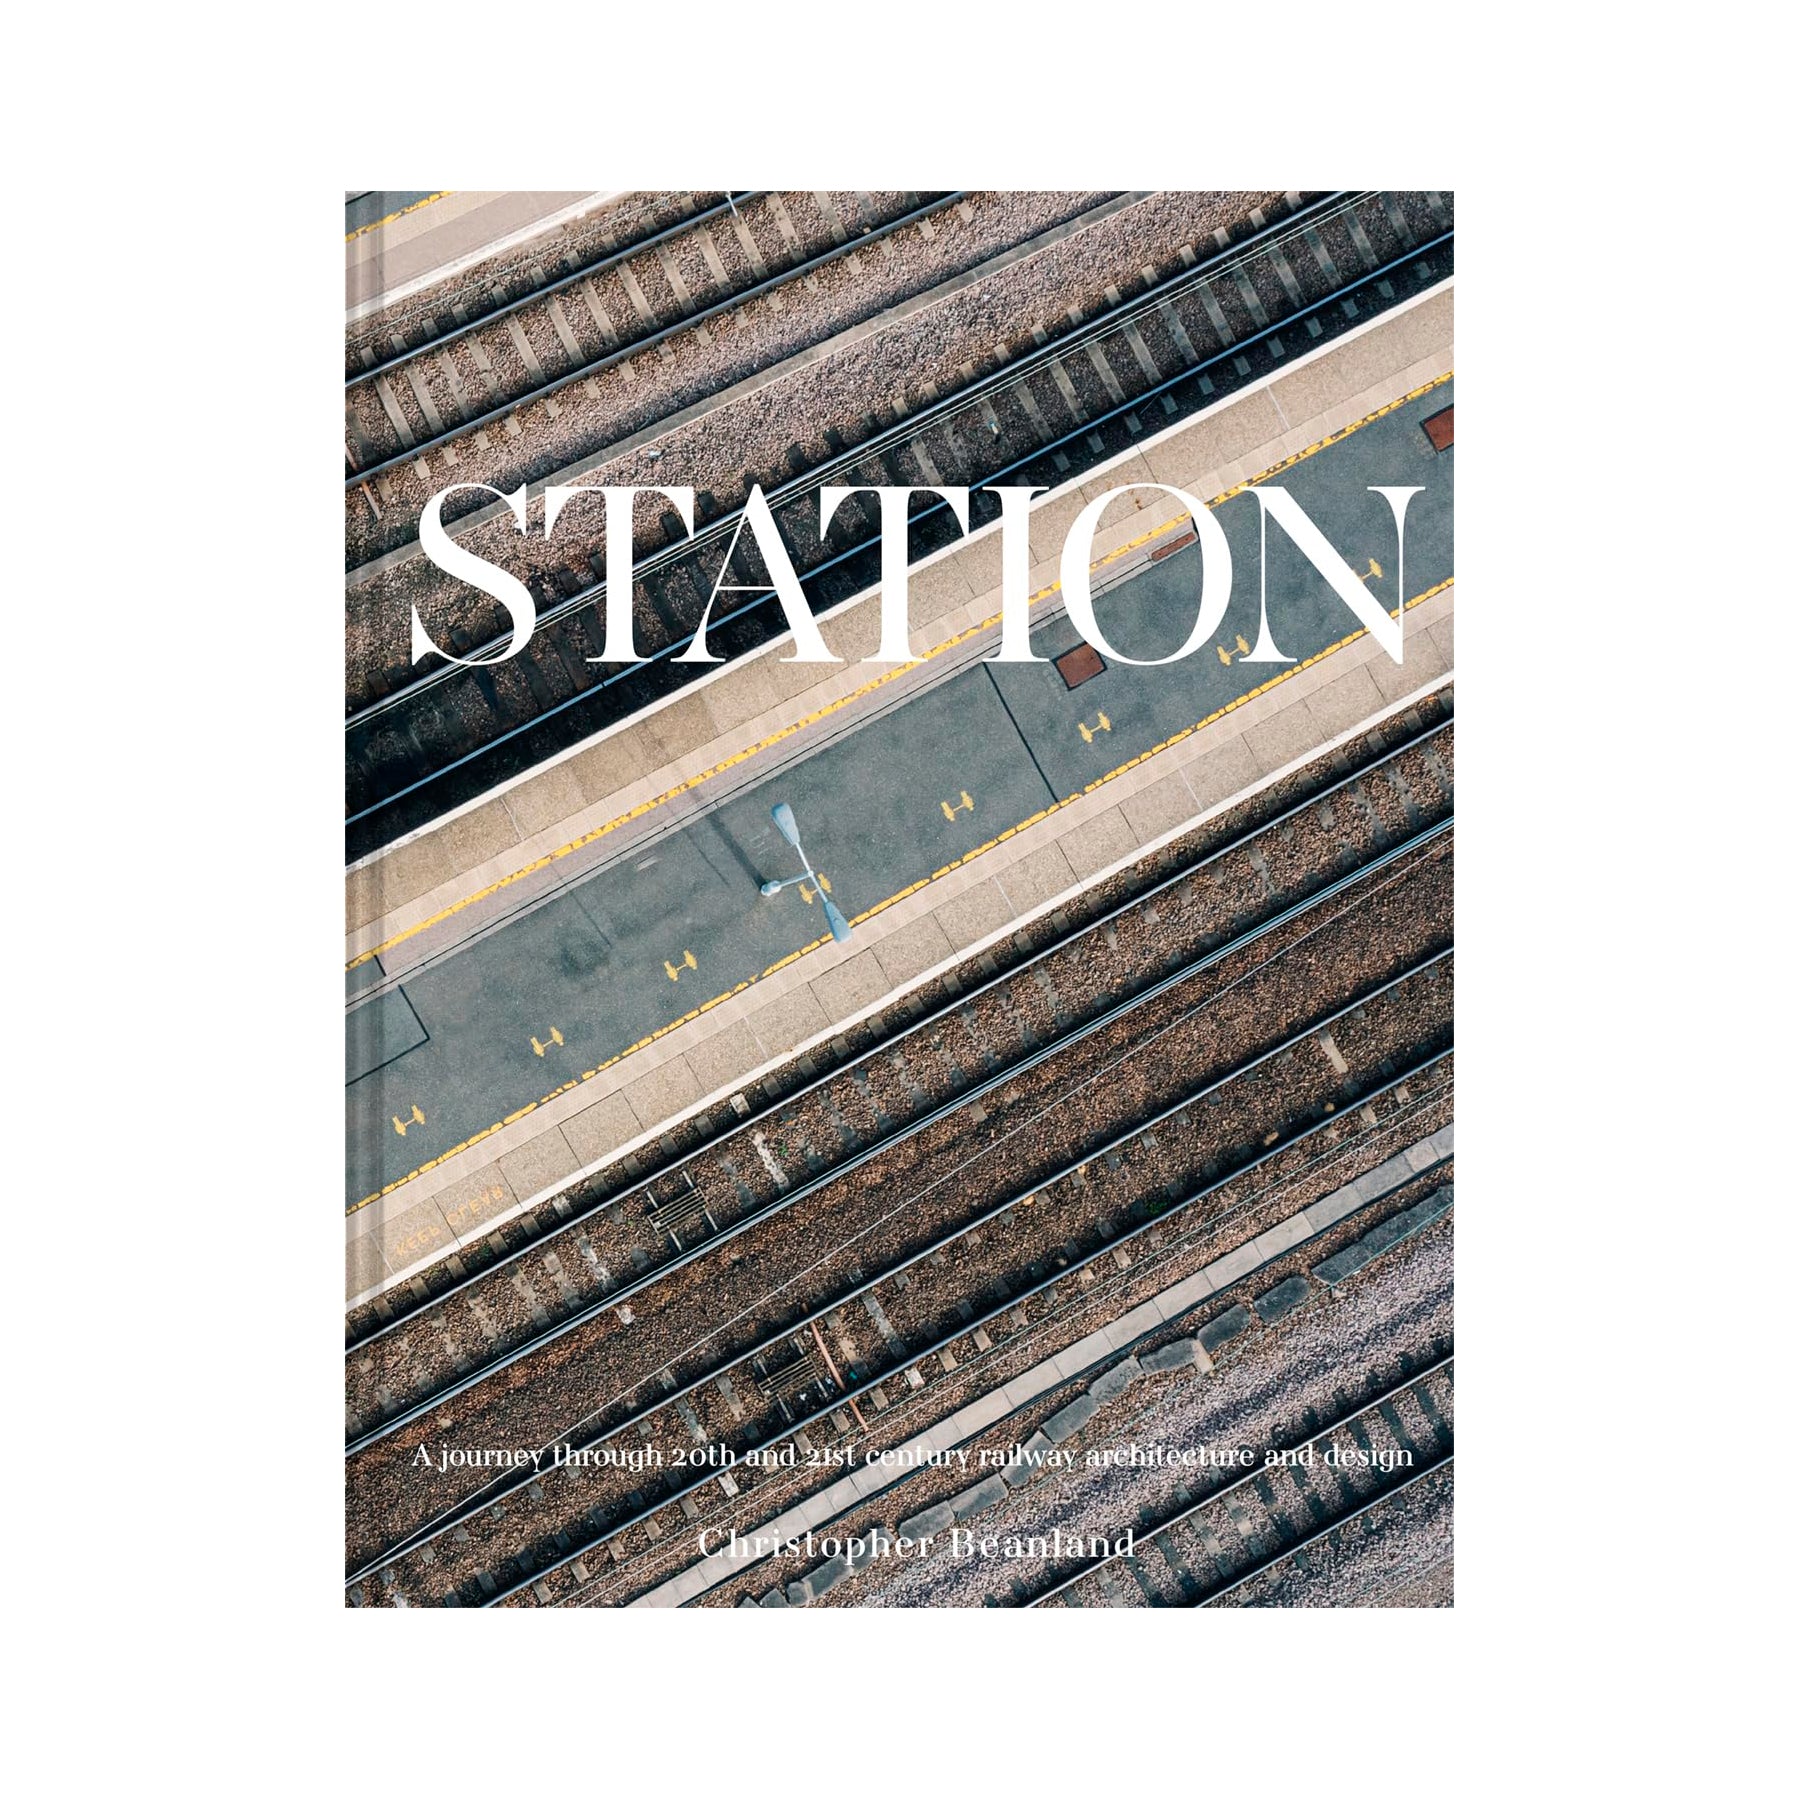 Station: A Journey Through 20th and 21st Century Railway Architecture and Design